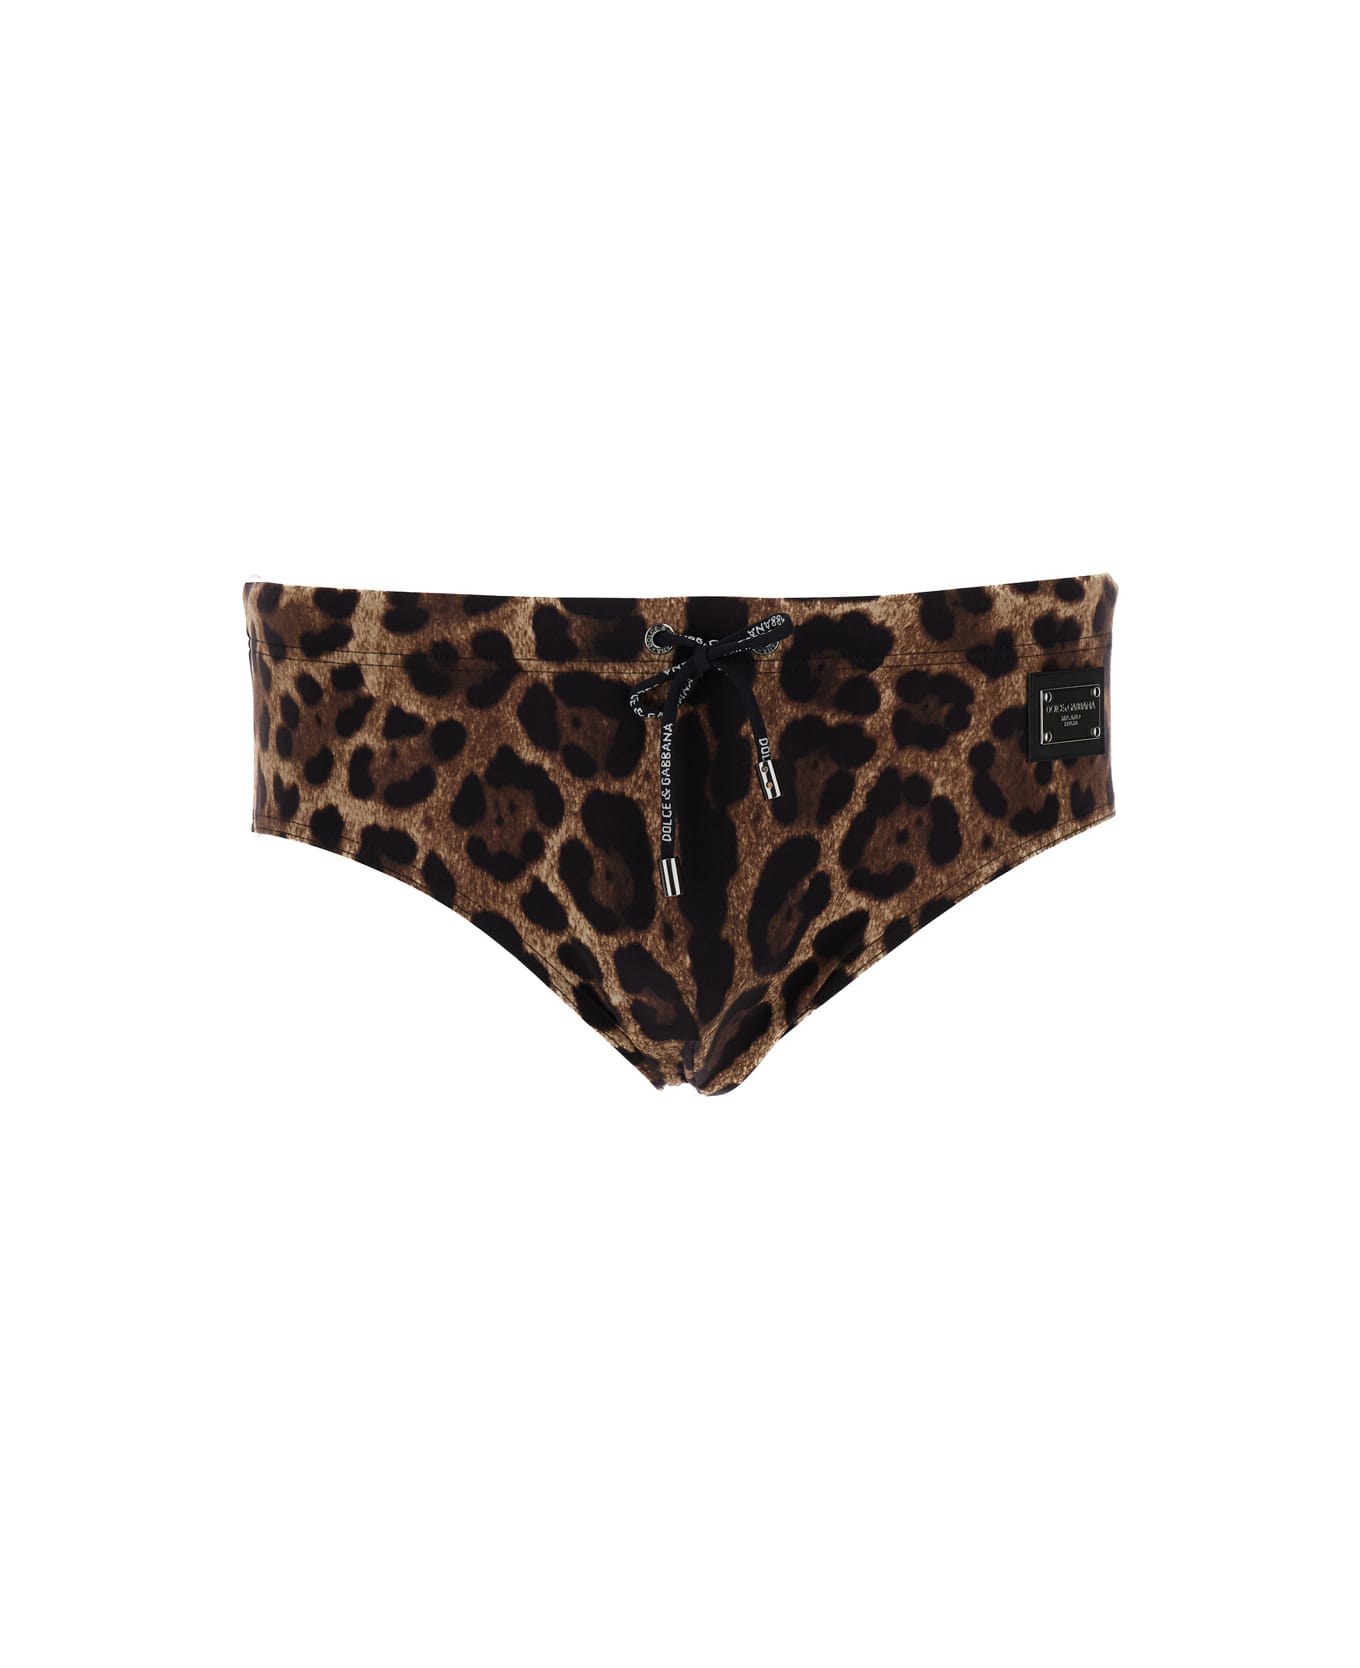 Dolce & Gabbana Brown All-over Leopard Print Swimsuit Briefs In Technical Fabric Man - Brown 水着